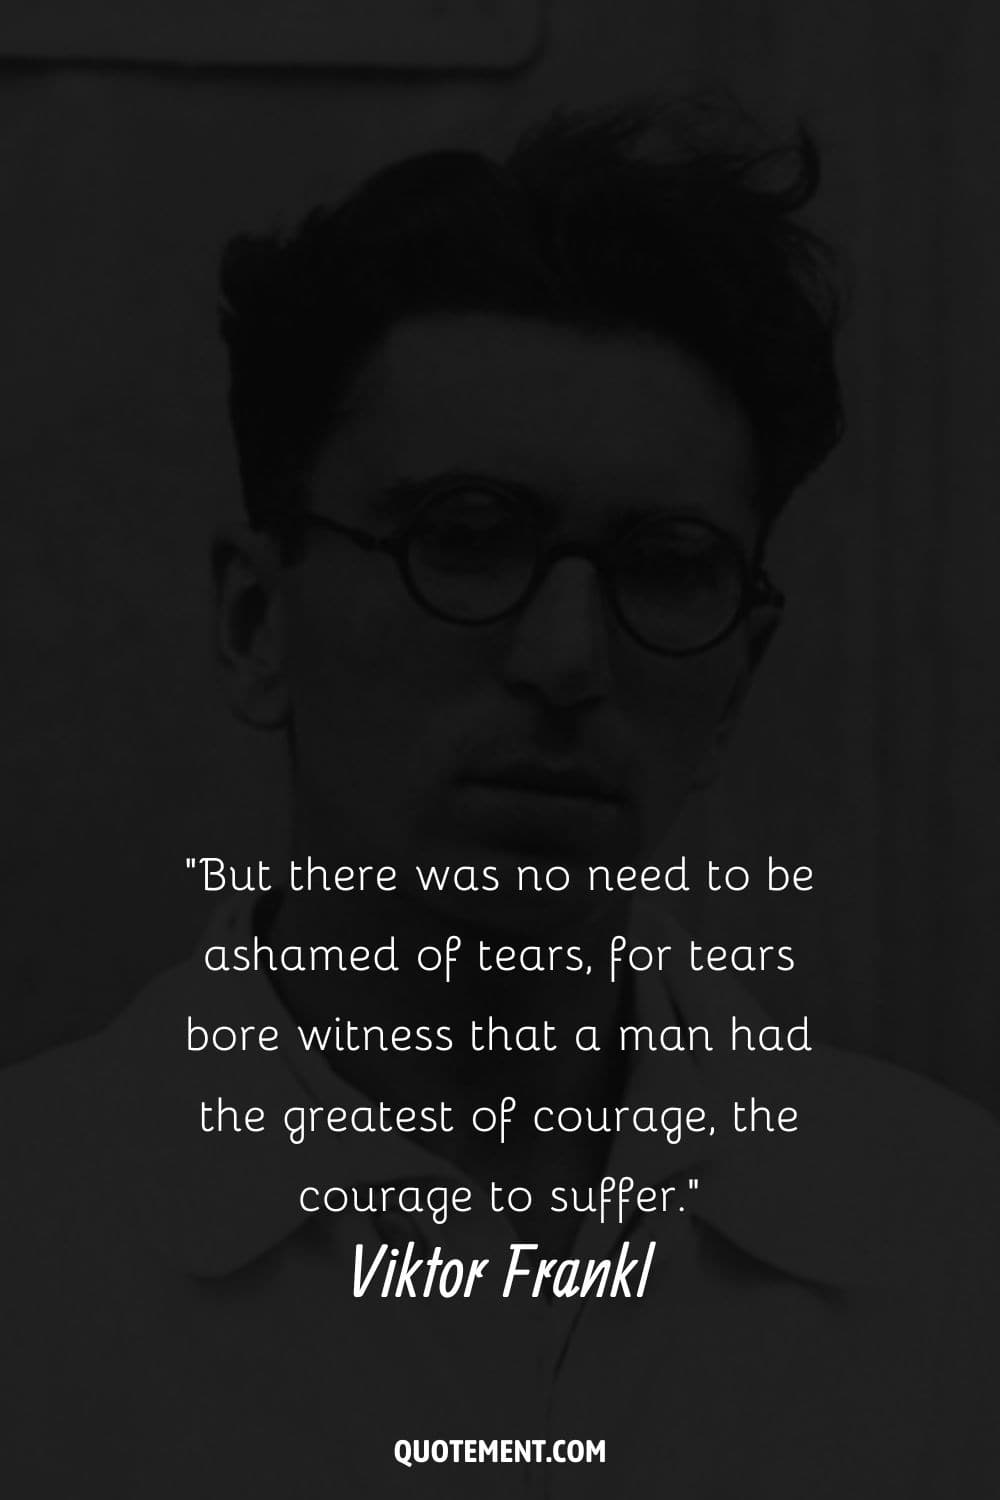 Viktor Frankl posing in white shirt representing his quote on courage and suffering.